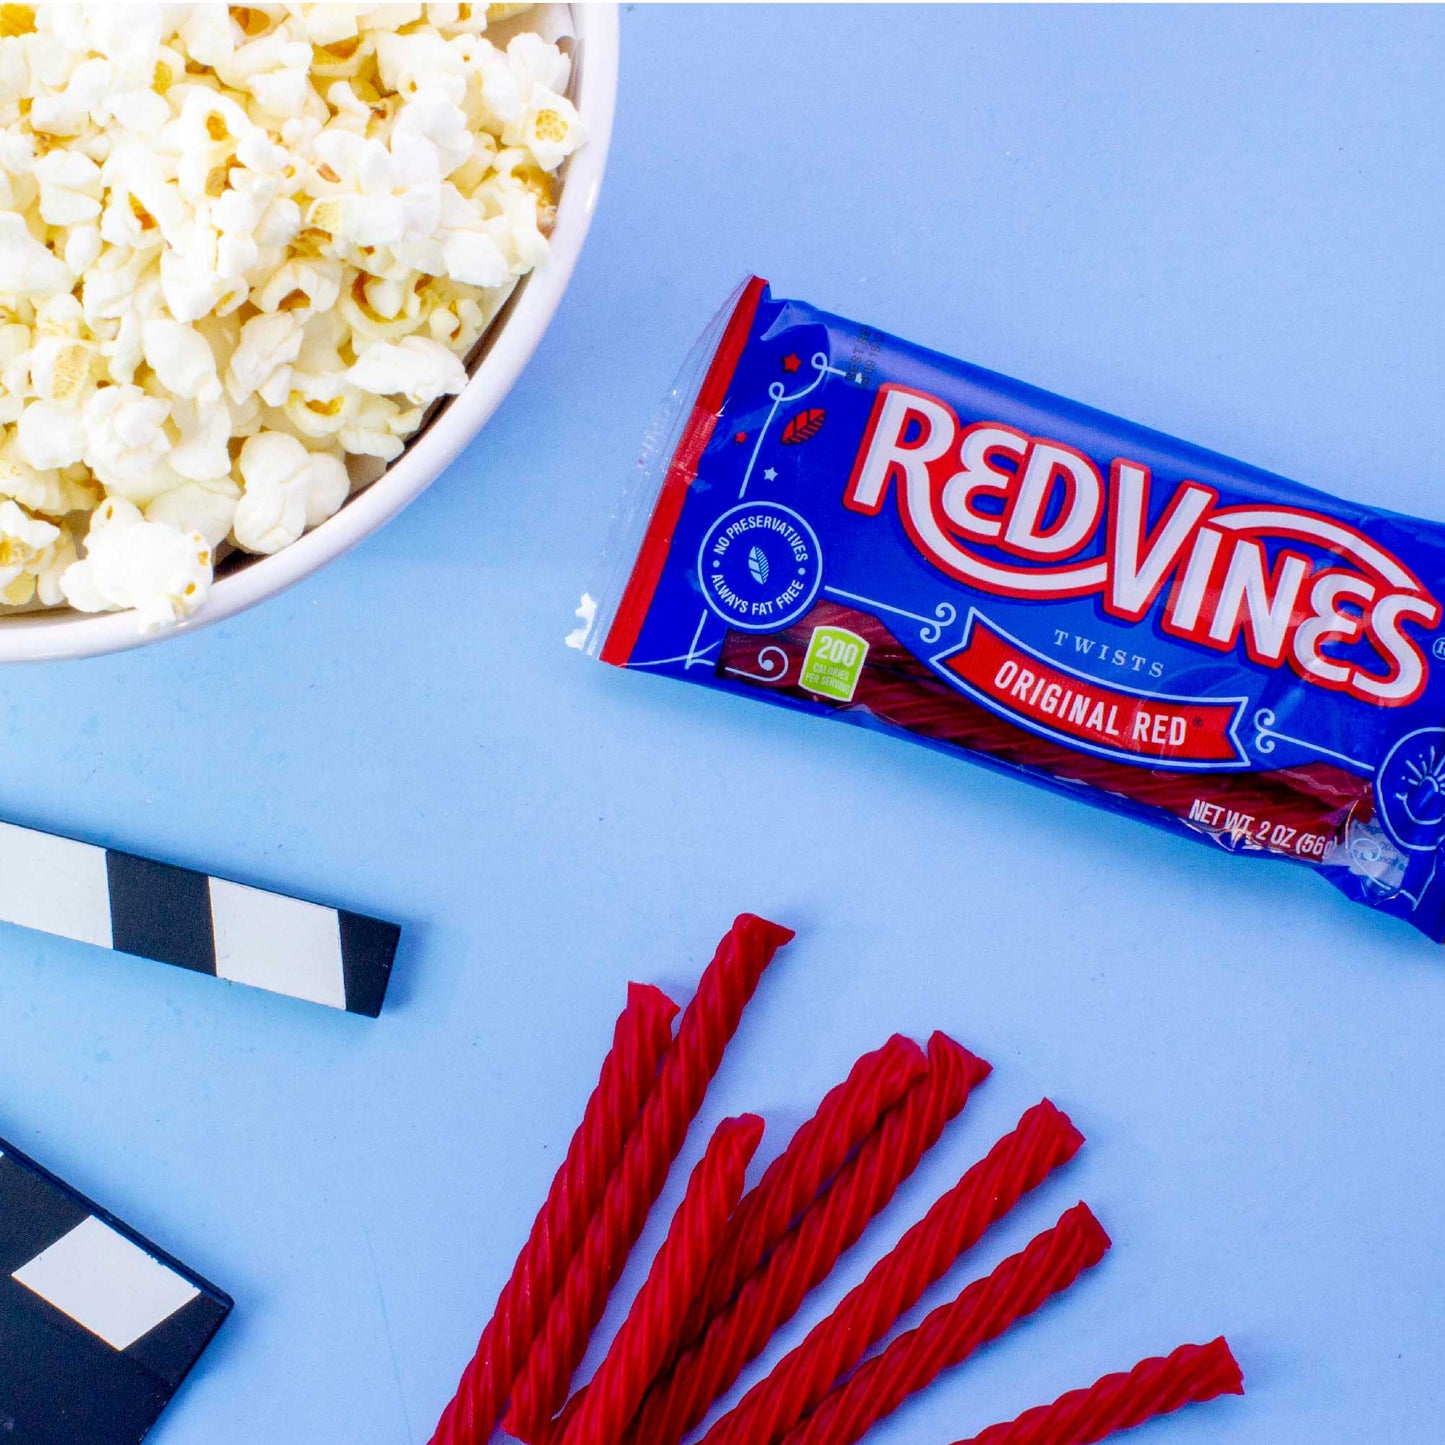 Red Vines Original Red Chewy Licorice Twists 2oz Bag with popcorn